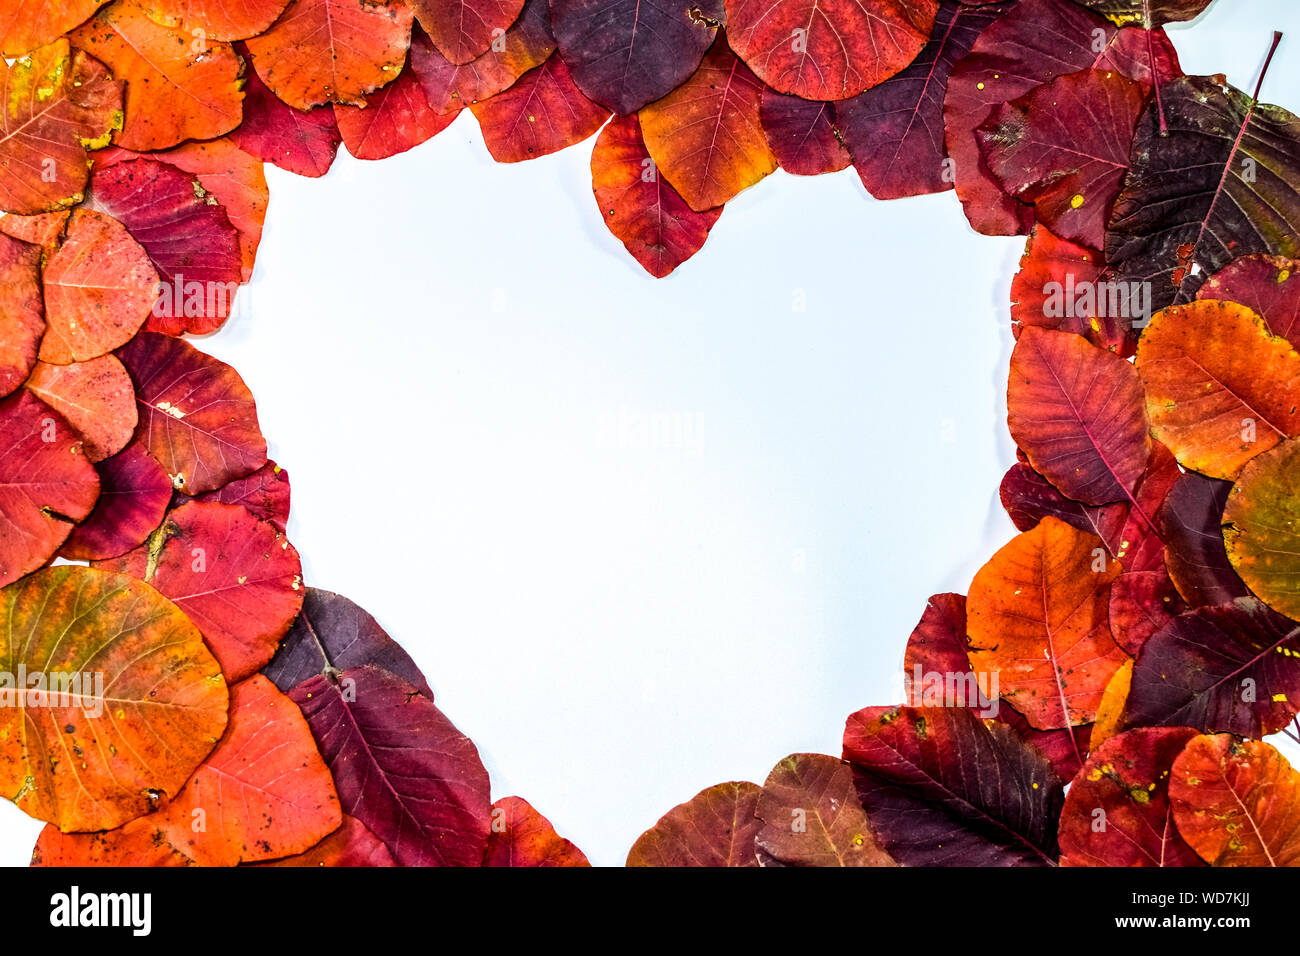 Autumn red leaflets of cotinus coggygria on a white background in the shape of a heart. copyspace of autumn leaves. Stock Photo